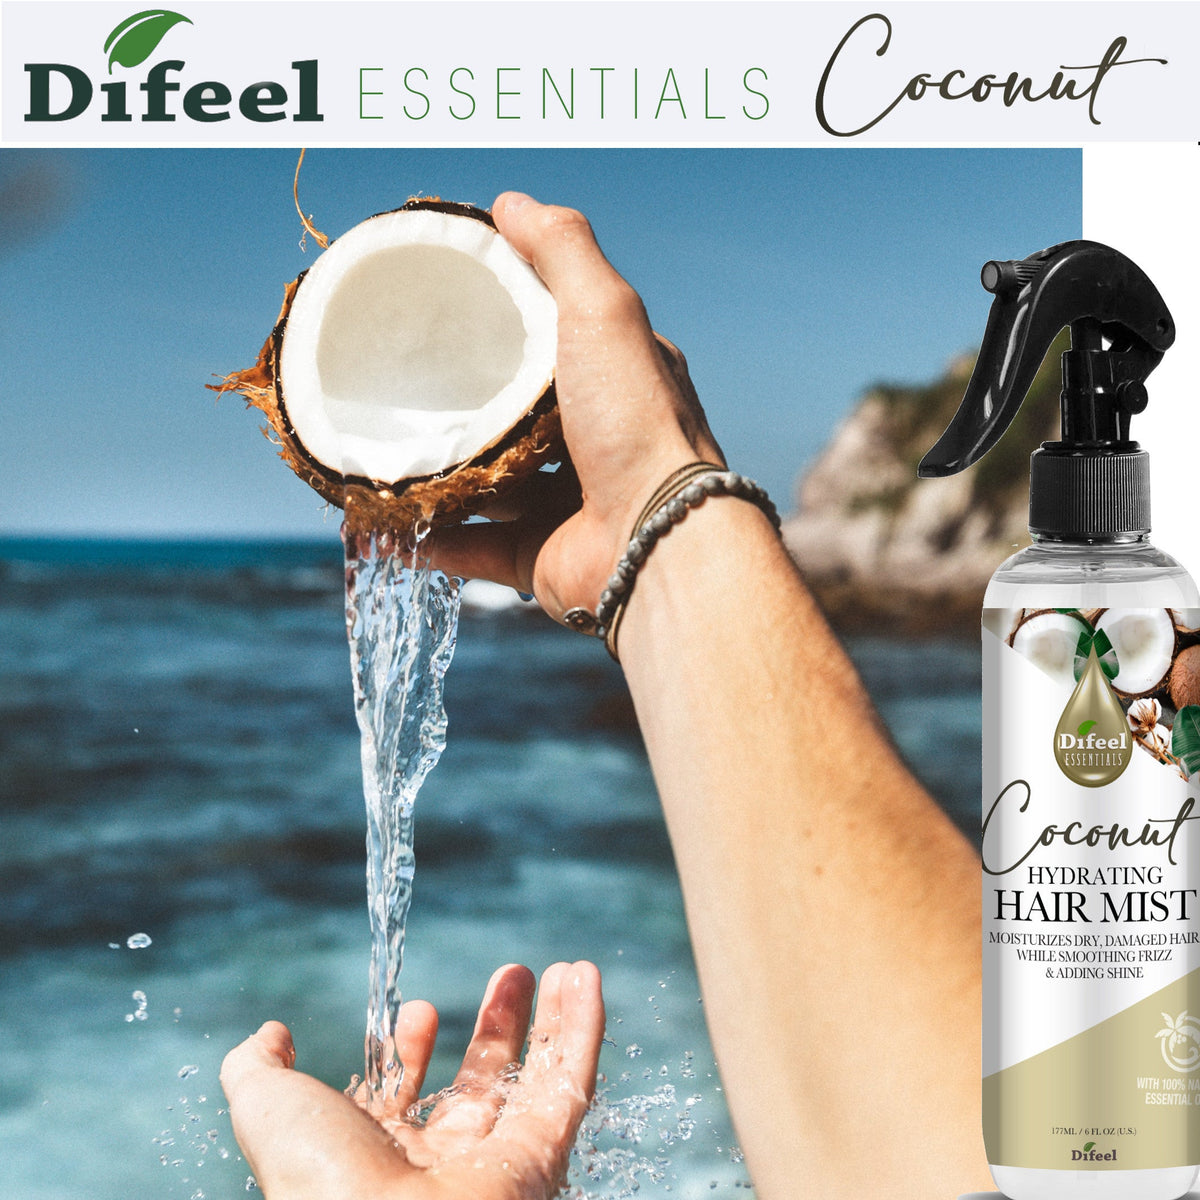 Difeel Essentials Hydrating Coconut - Hair Mist 6 oz. by difeel - find your natural beauty